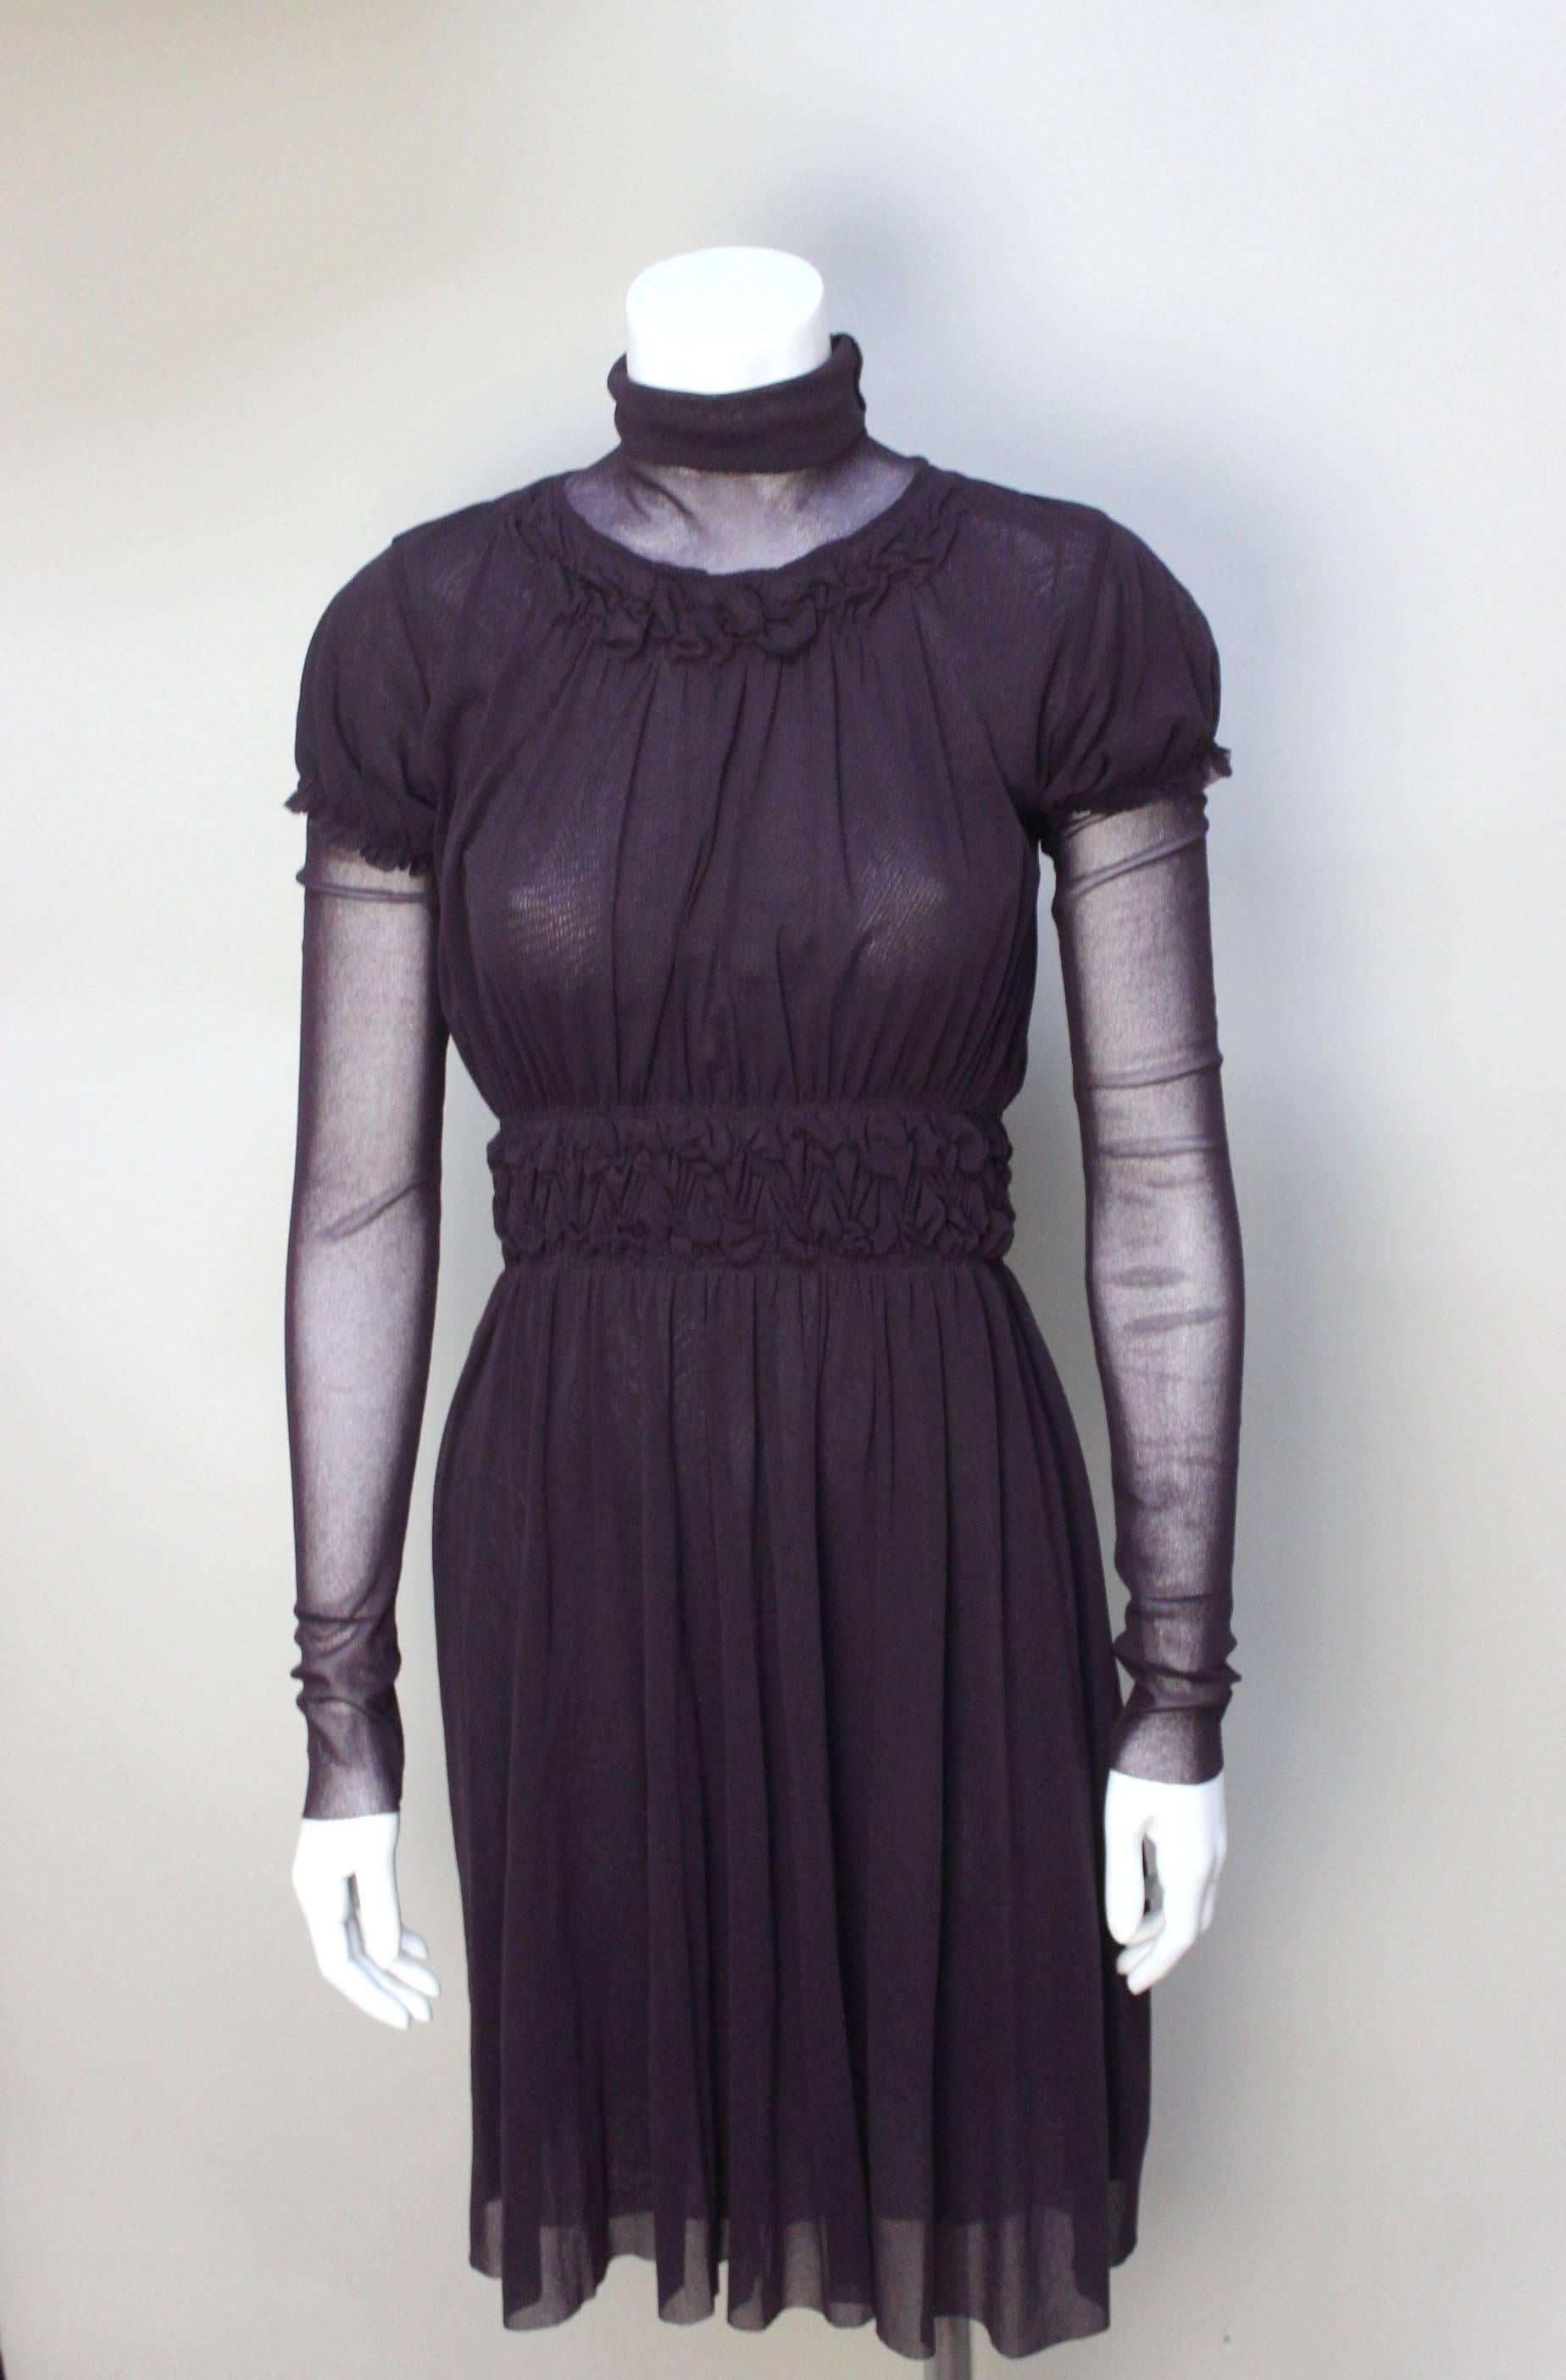 This Gaultier Solieil dress is layered in a playful manner. A very sheer neck insert can be pulled up into a high turtleneck. The body of the dress has puffed sleeves, a ruched waist in a double layer of mesh and long sheer mesh sleeves  that extend